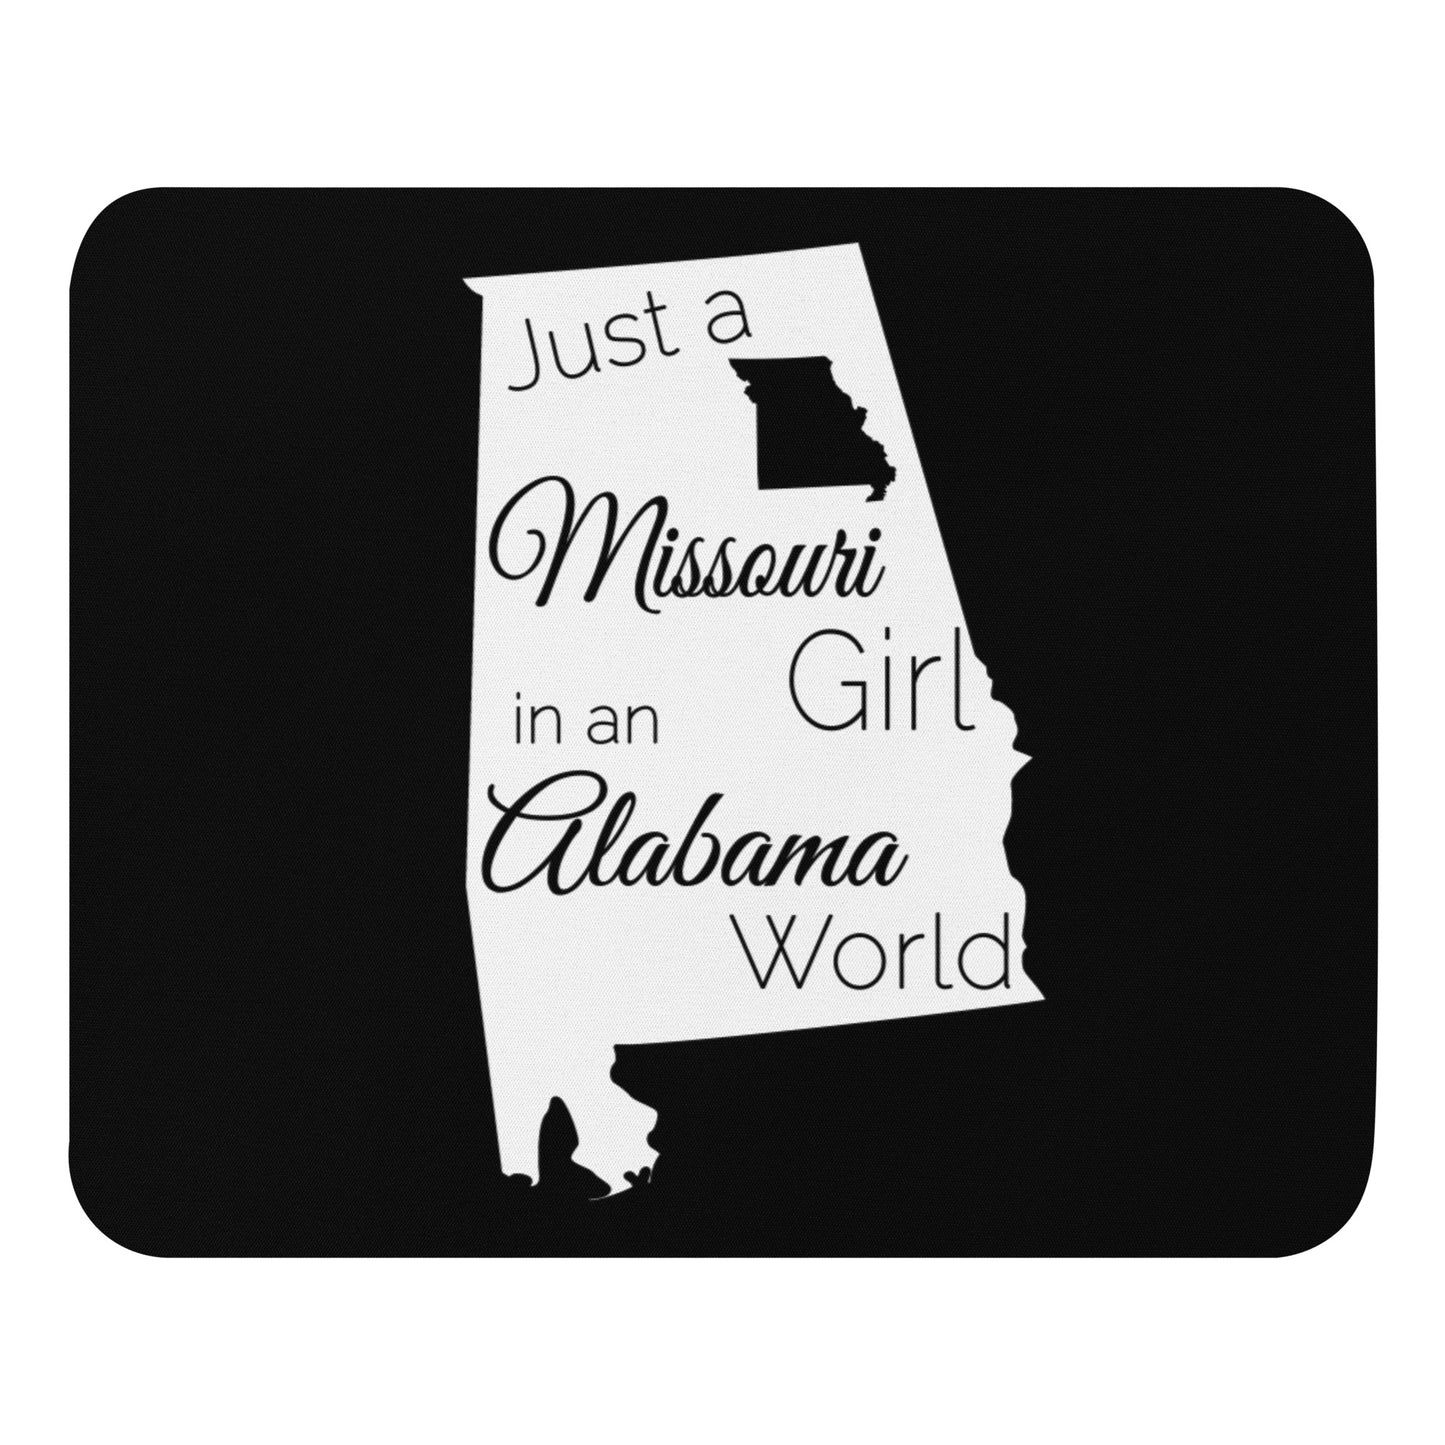 Just a Missouri Girl in an Alabama World Mouse pad